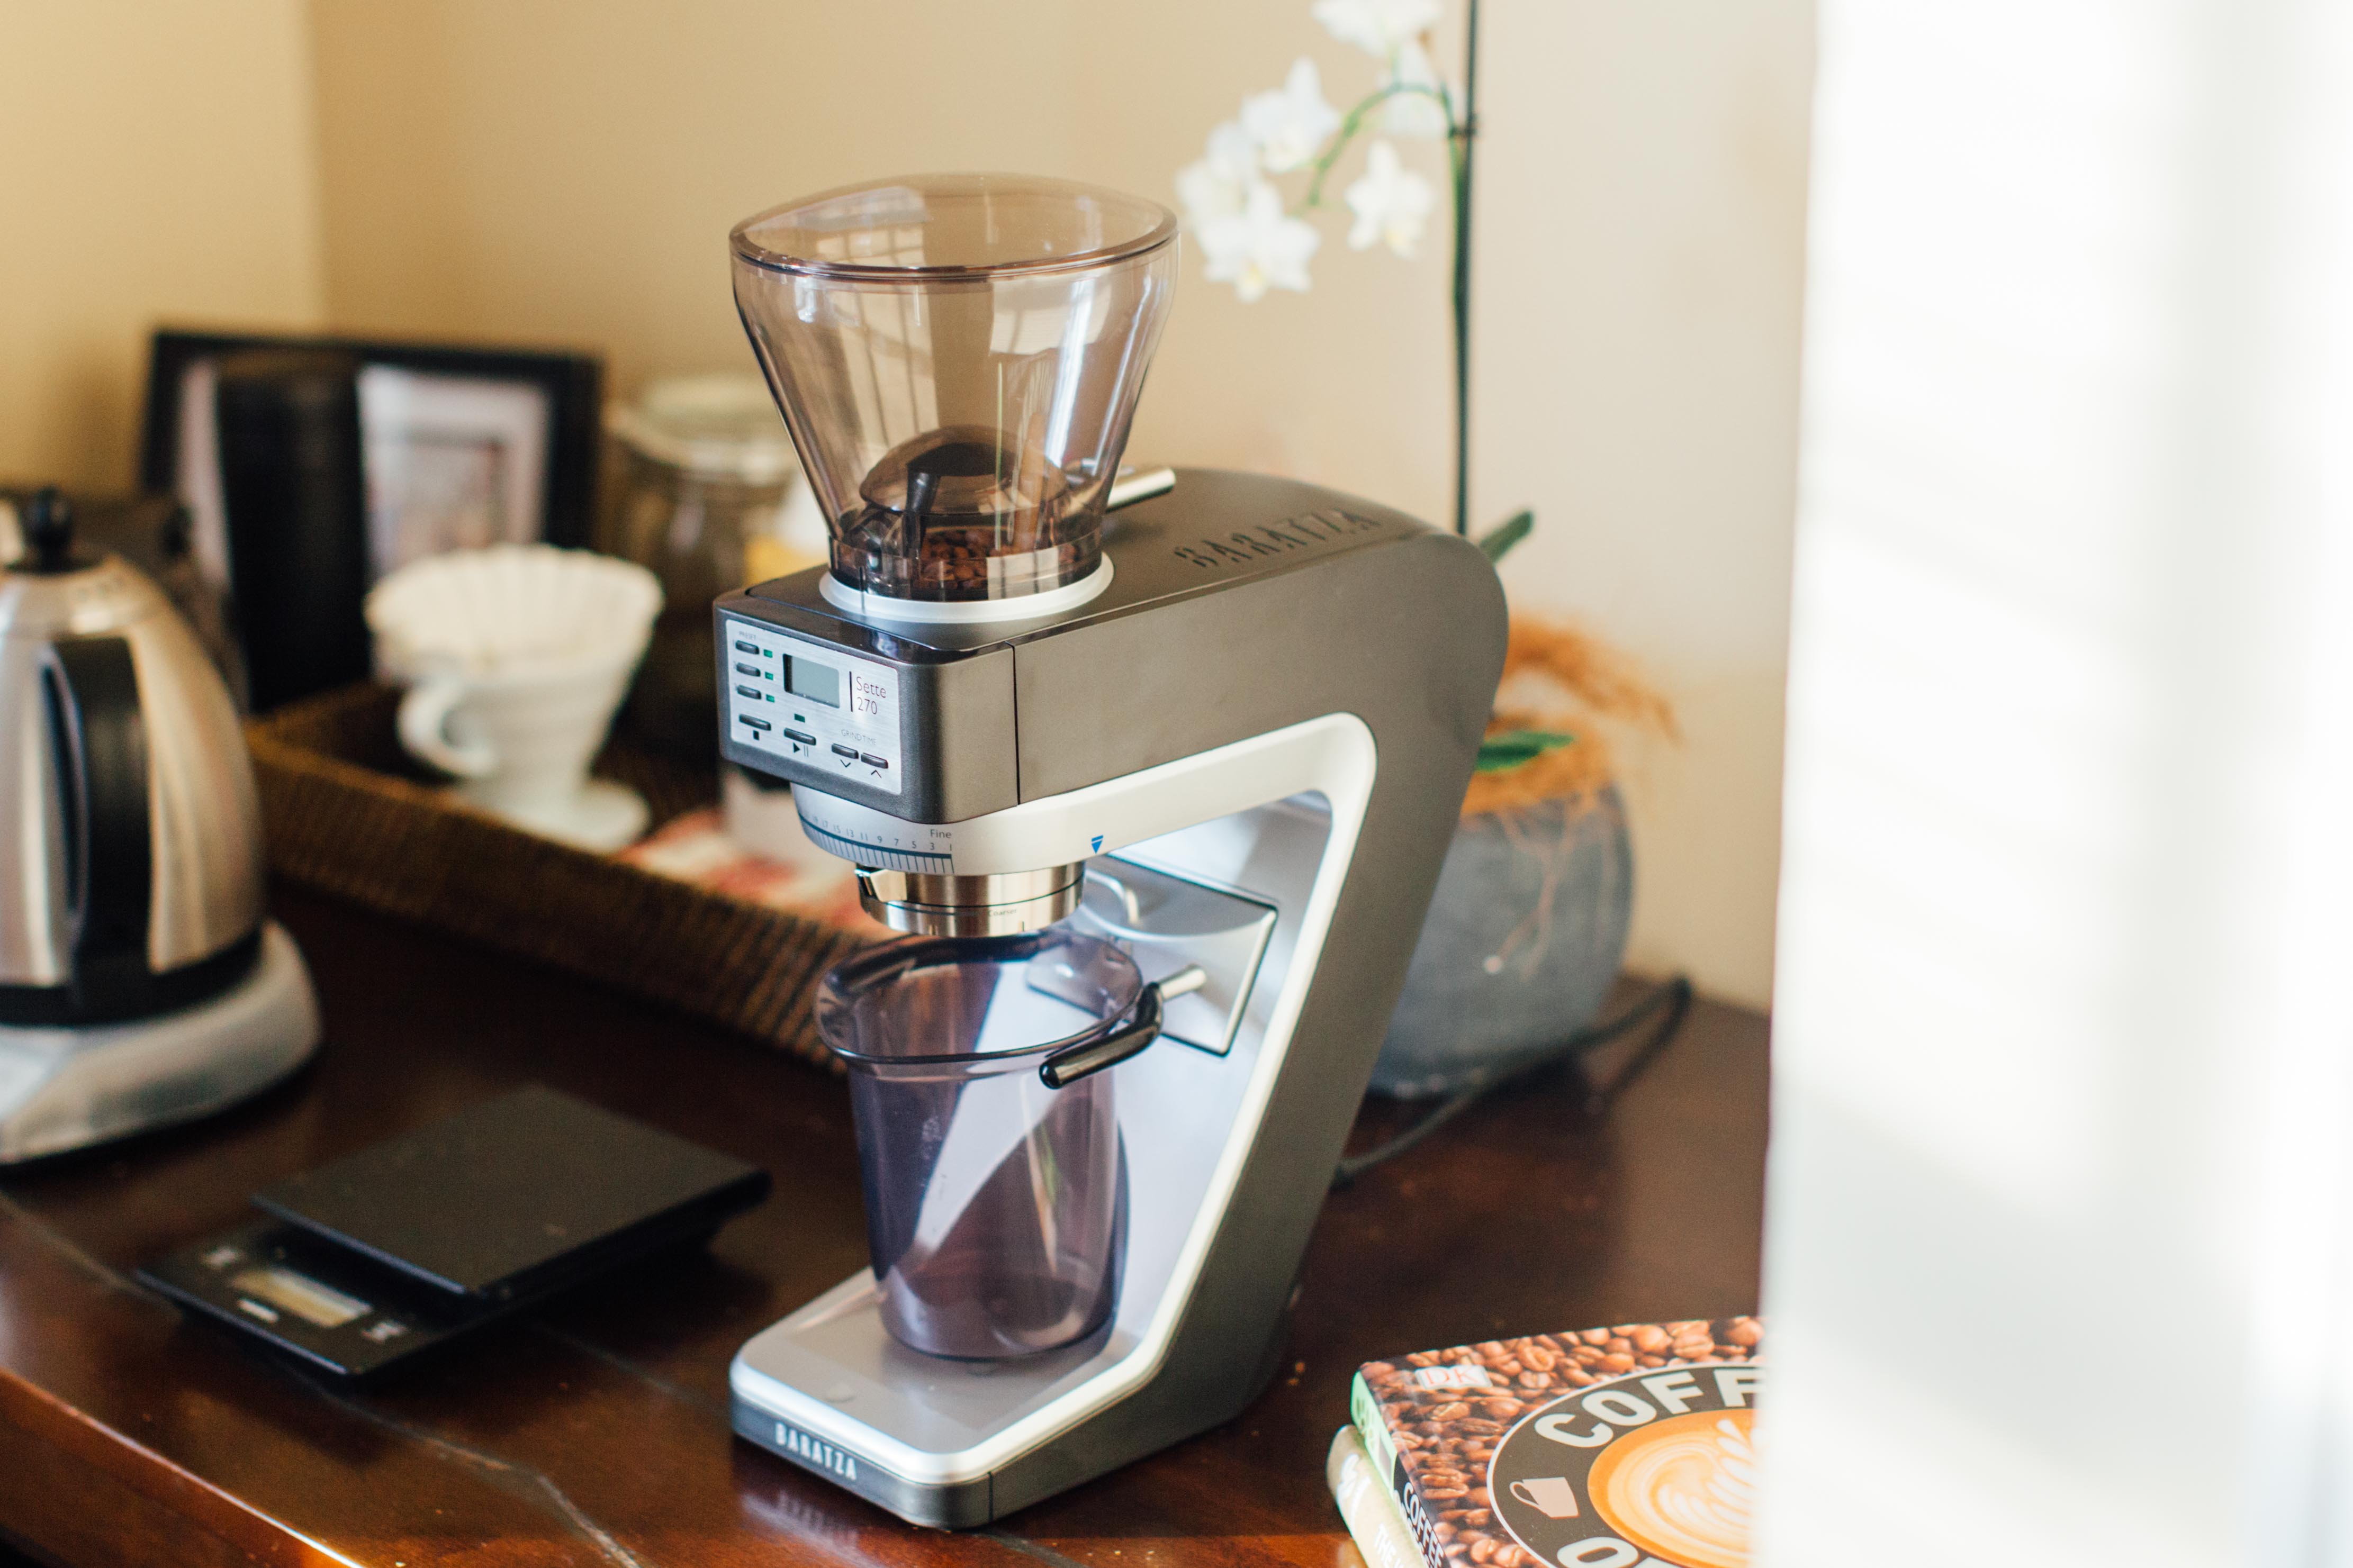 Baratza's new Sette 270 is an example of a mid-range burr grinder with excellent performance for the price.